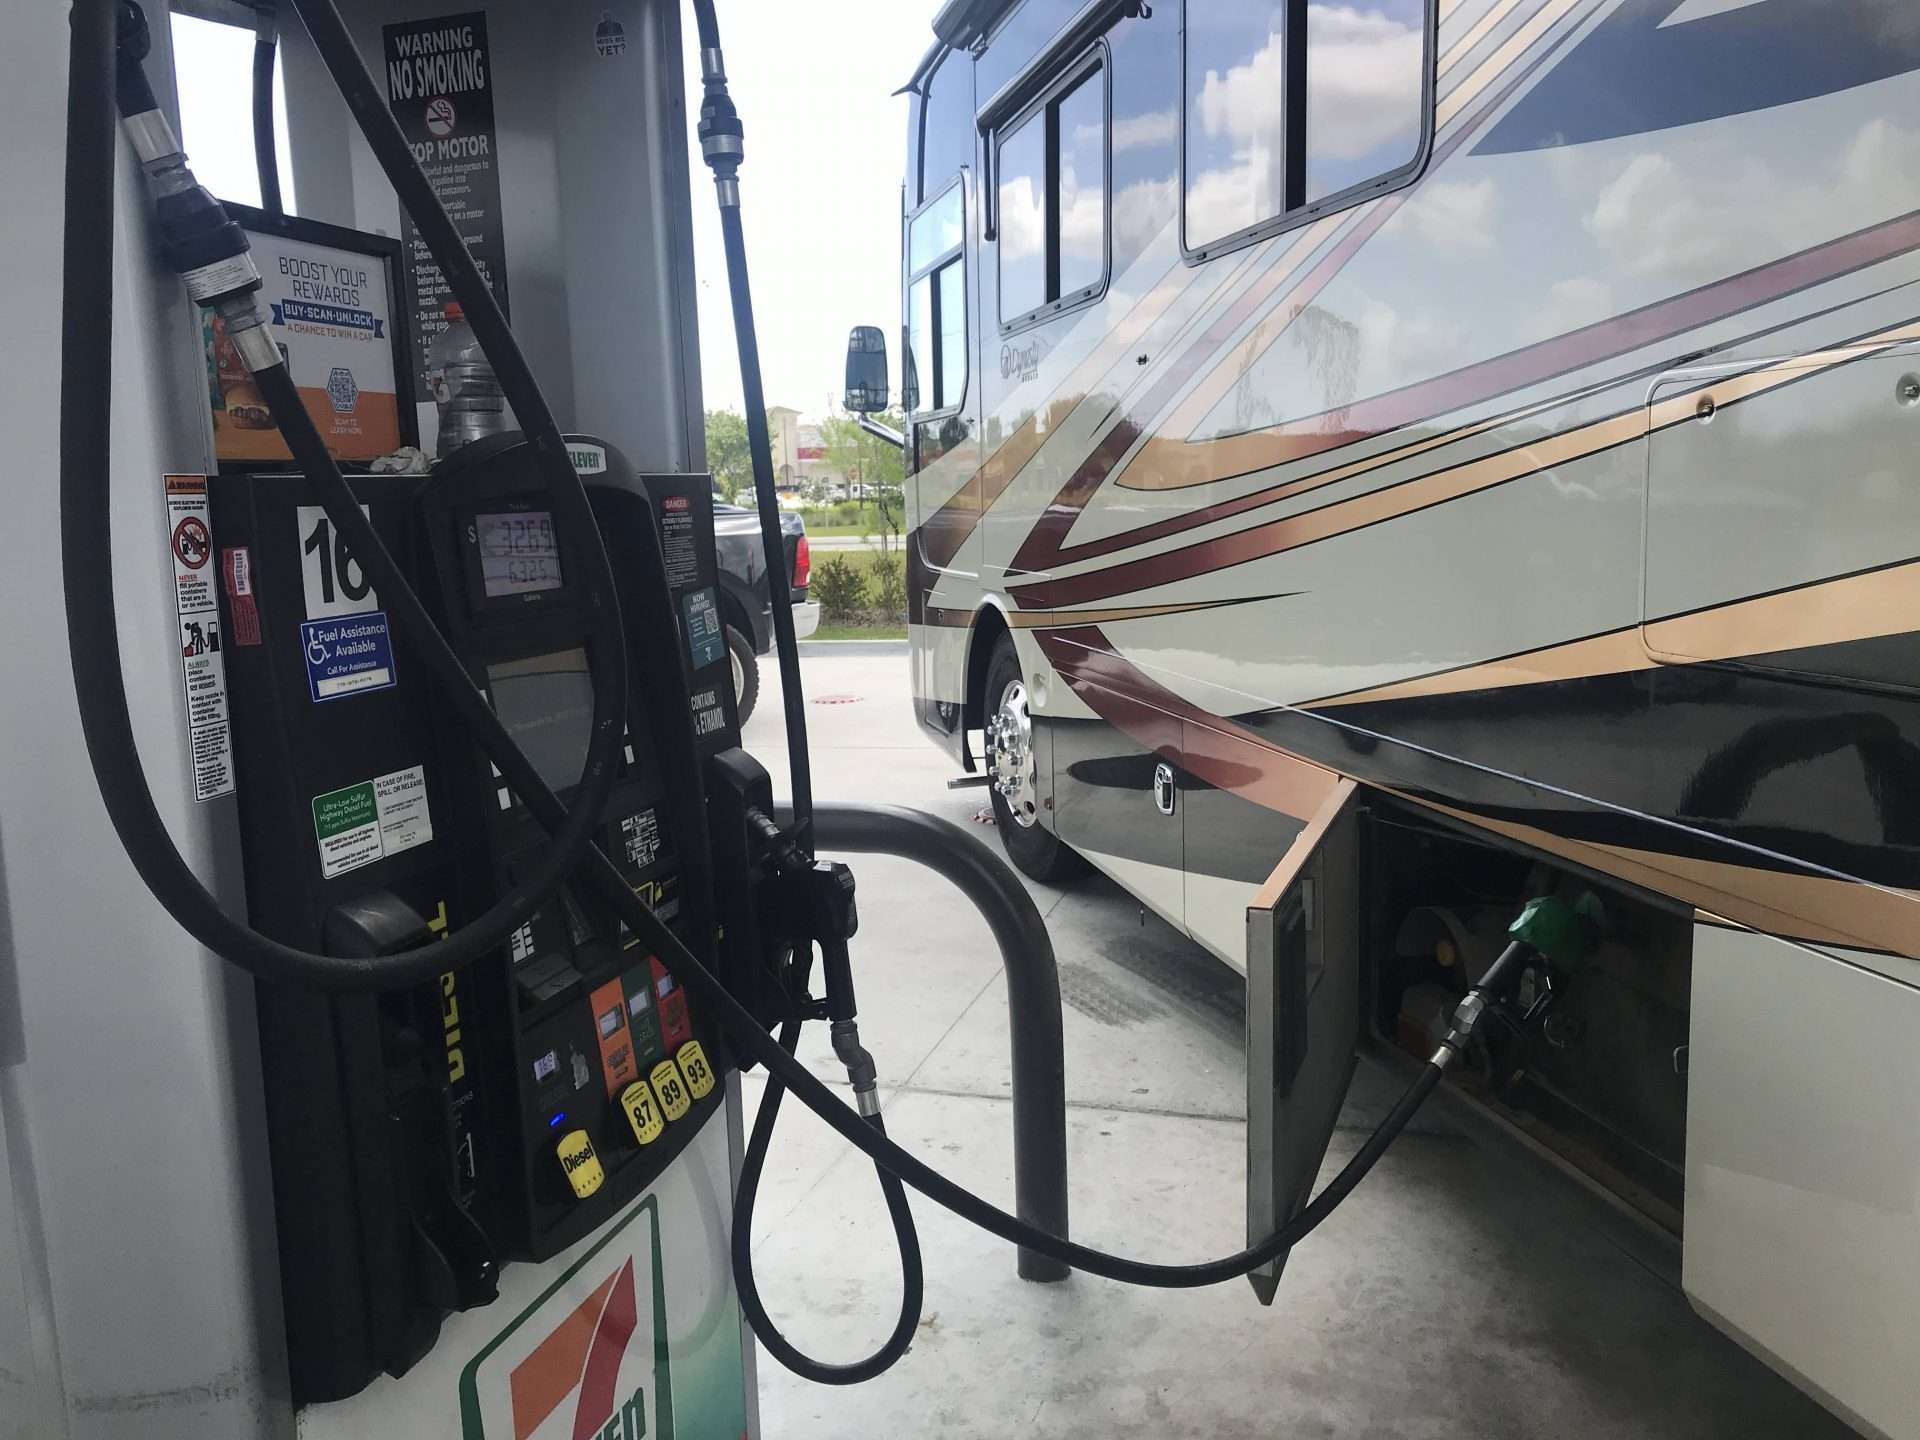 Motorhome being refilled at gas station